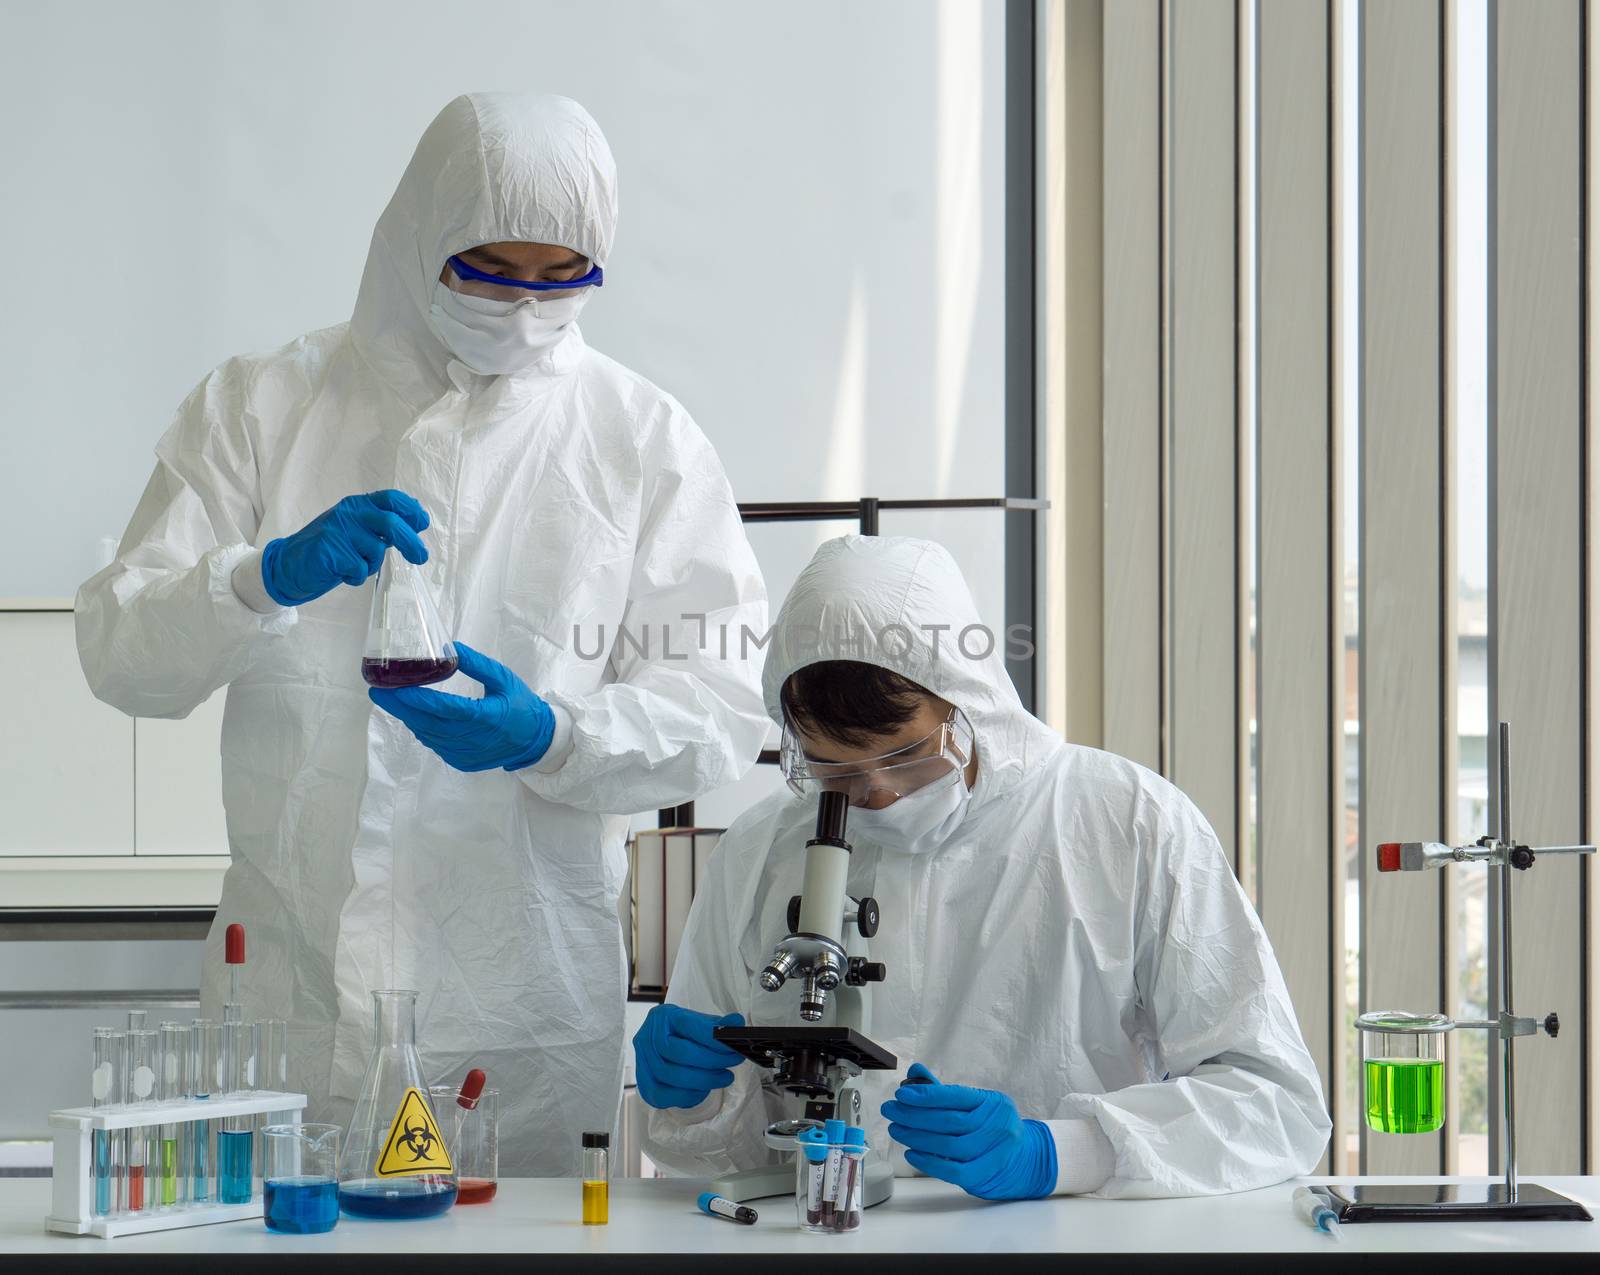 Researchers use microscopes to look at blood samples of infected people.
Coronavirus disease 2019 (COVID-19) testing process in a laboratory preventing the spread of viral research.